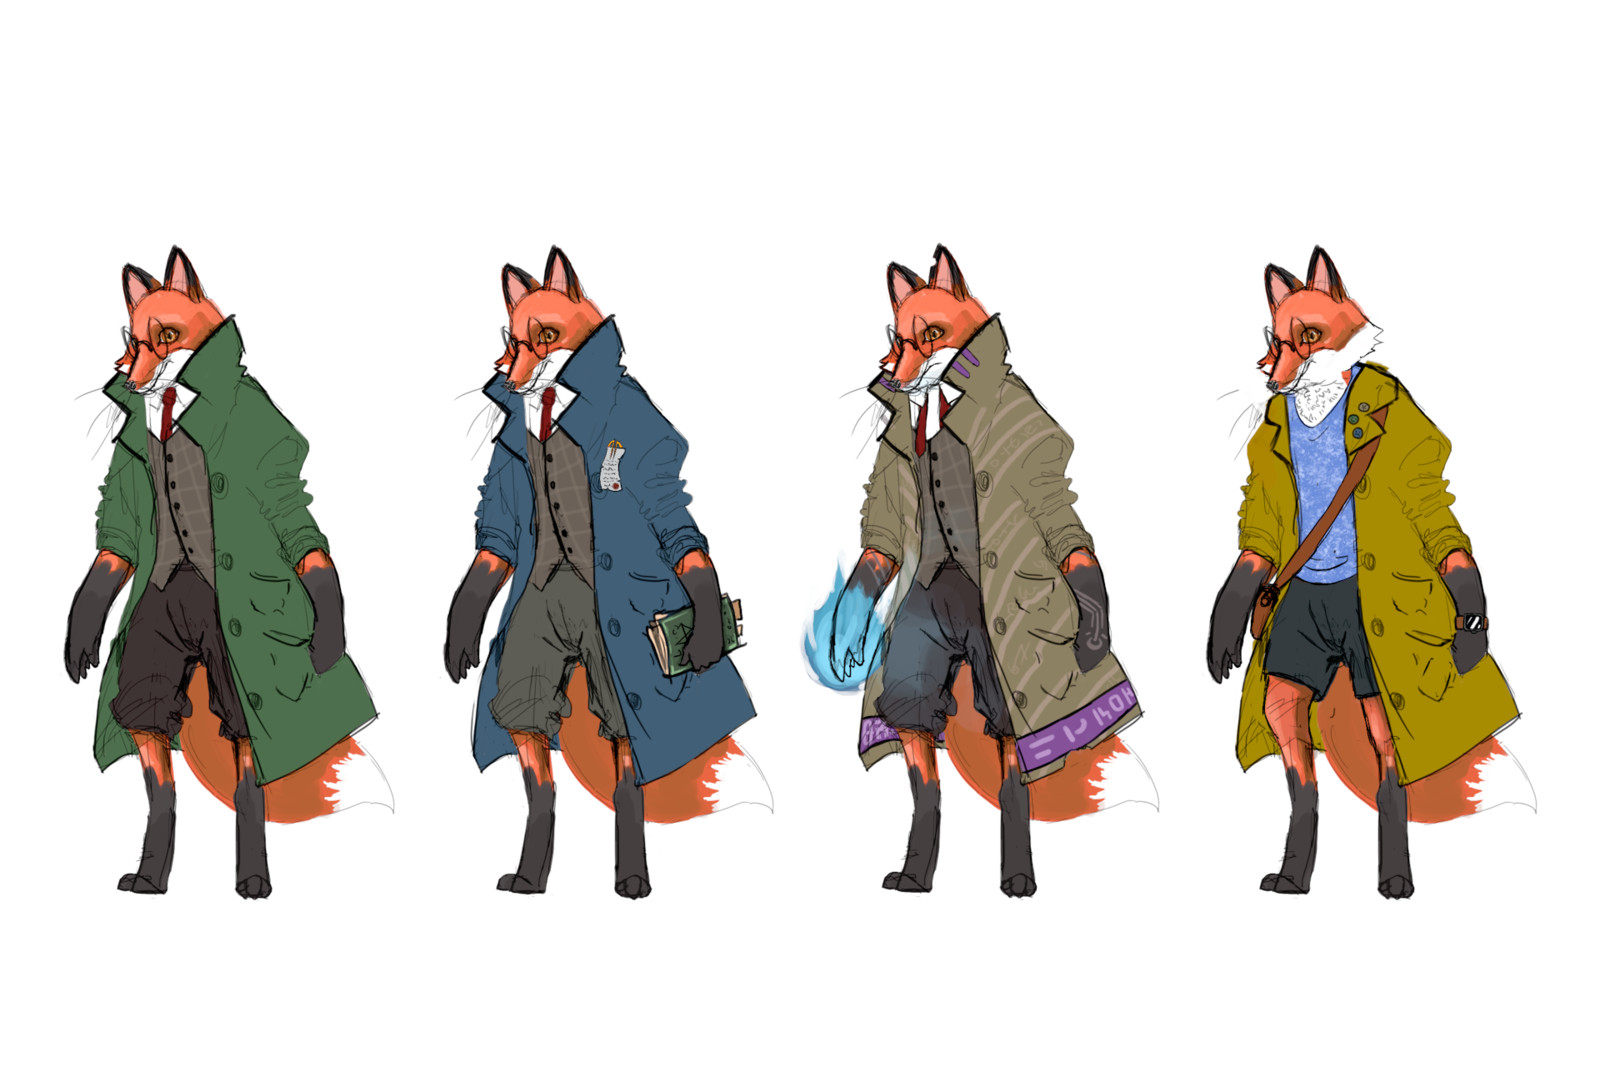 Since this was to be a quick concept for a character, I didn't spend too much time rendering it all out. 

Left to right: 
base
sophisticated
battle witch
modern